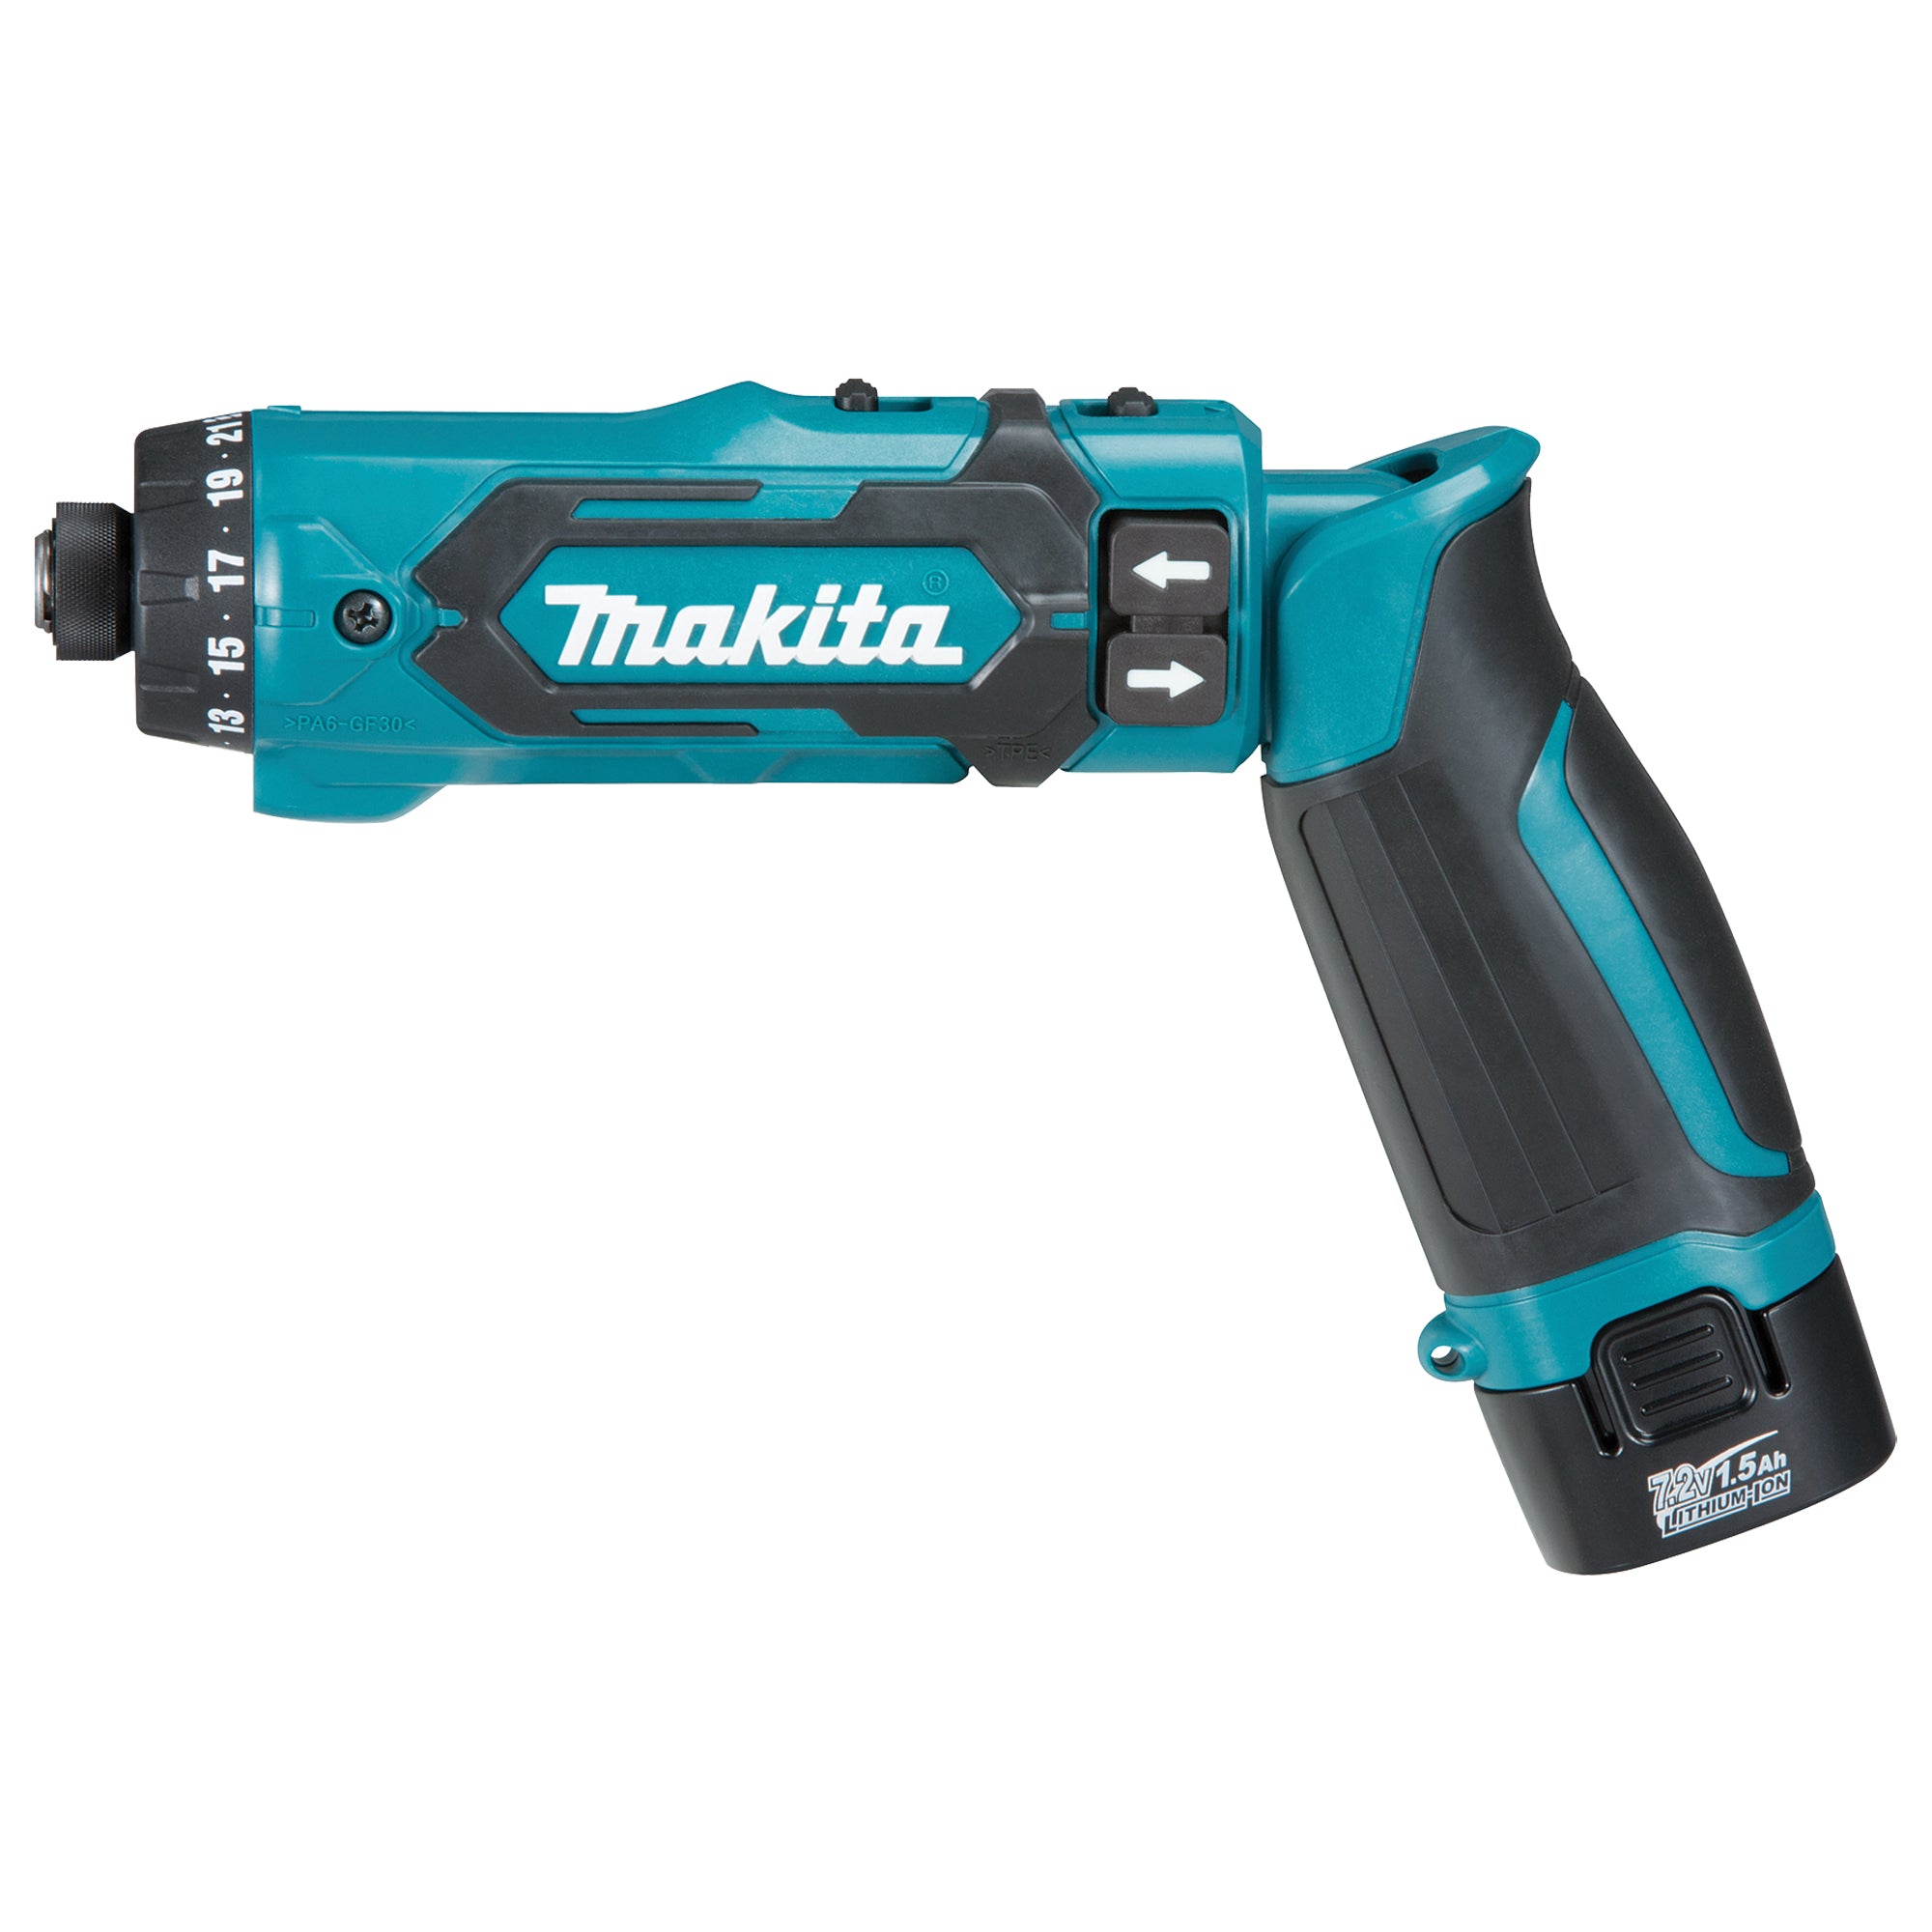 Makita DF012DSE Cordless Drill/Driver Kit, Lithium-Ion, 7.2 V, 1/4" Chuck, 71 in-lbs Torque